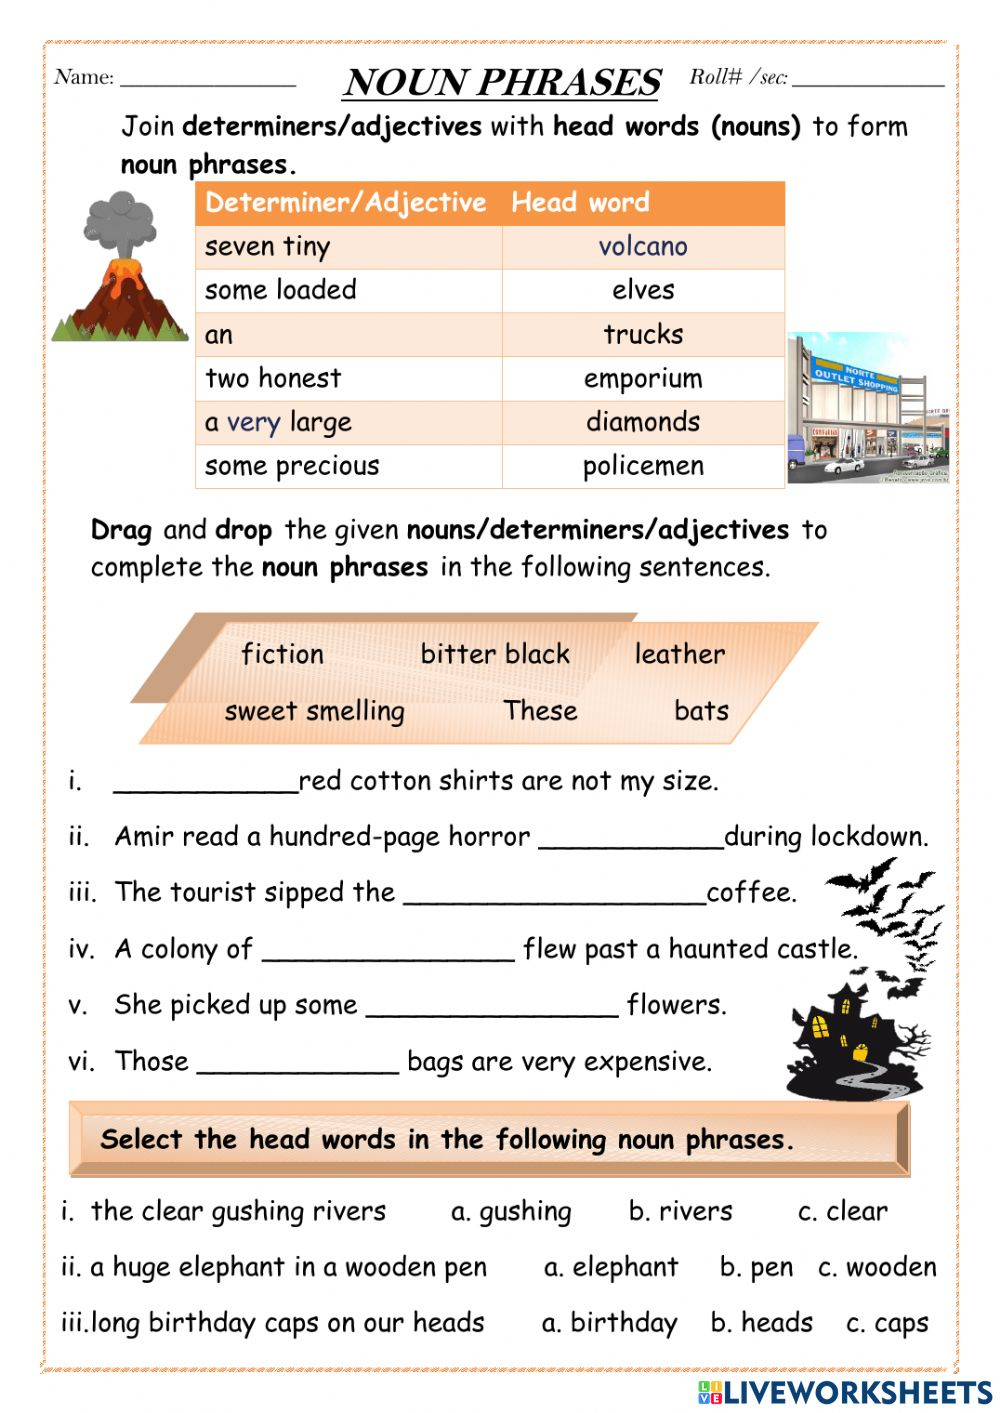 adjective-adverb-and-noun-phrases-worksheet-adjectiveworksheets